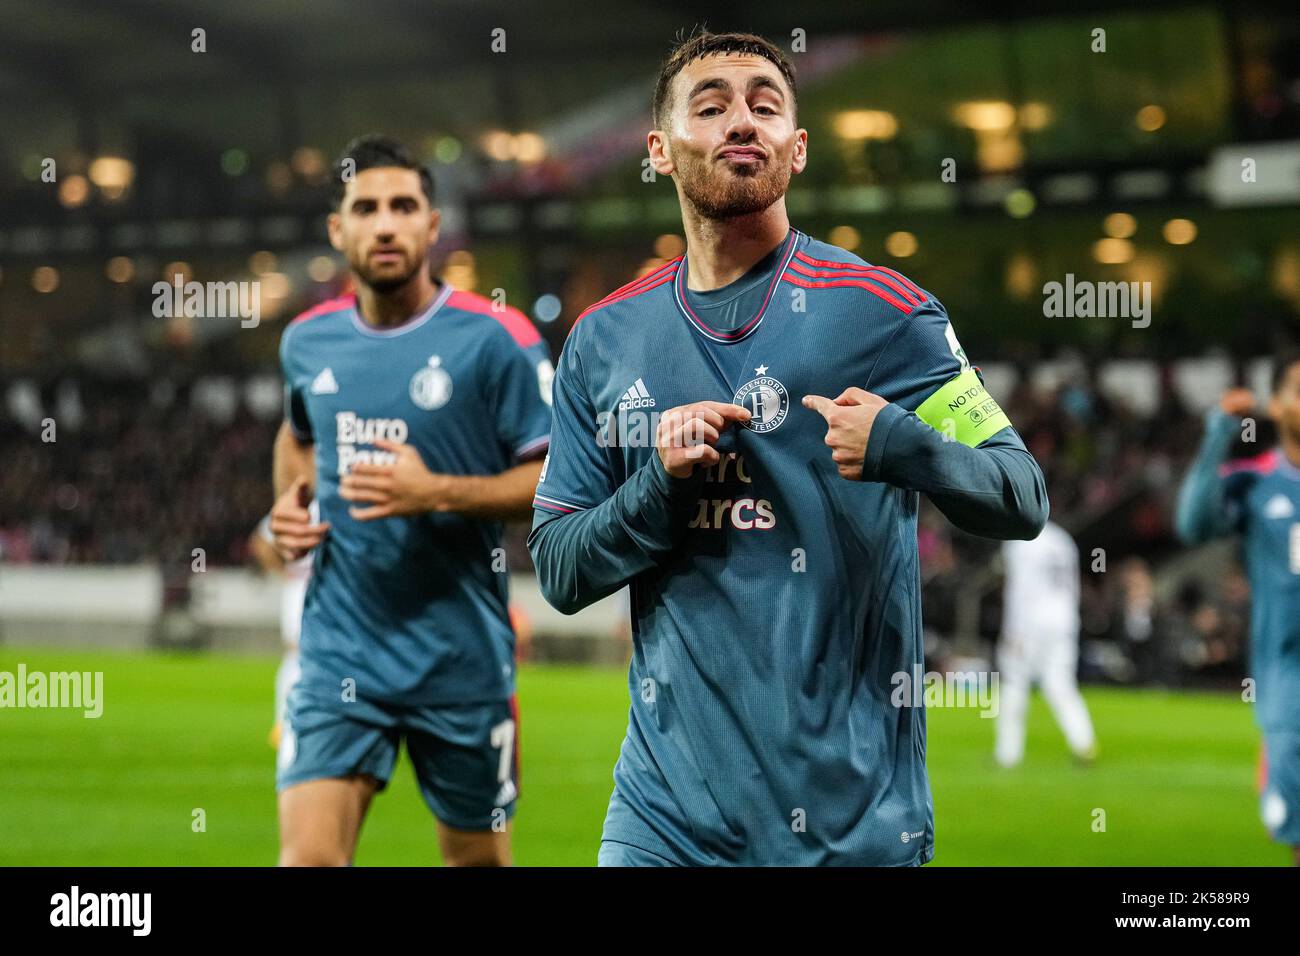 Herning - Orkun Kokcu of Feyenoord celebrates the 0-2 during the match between FC Midtjylland v Feyenoord at MCH Arena on 6 October 2022 in Herning, Denmark. (Box to Box Pictures/Tom Bode) Stock Photo